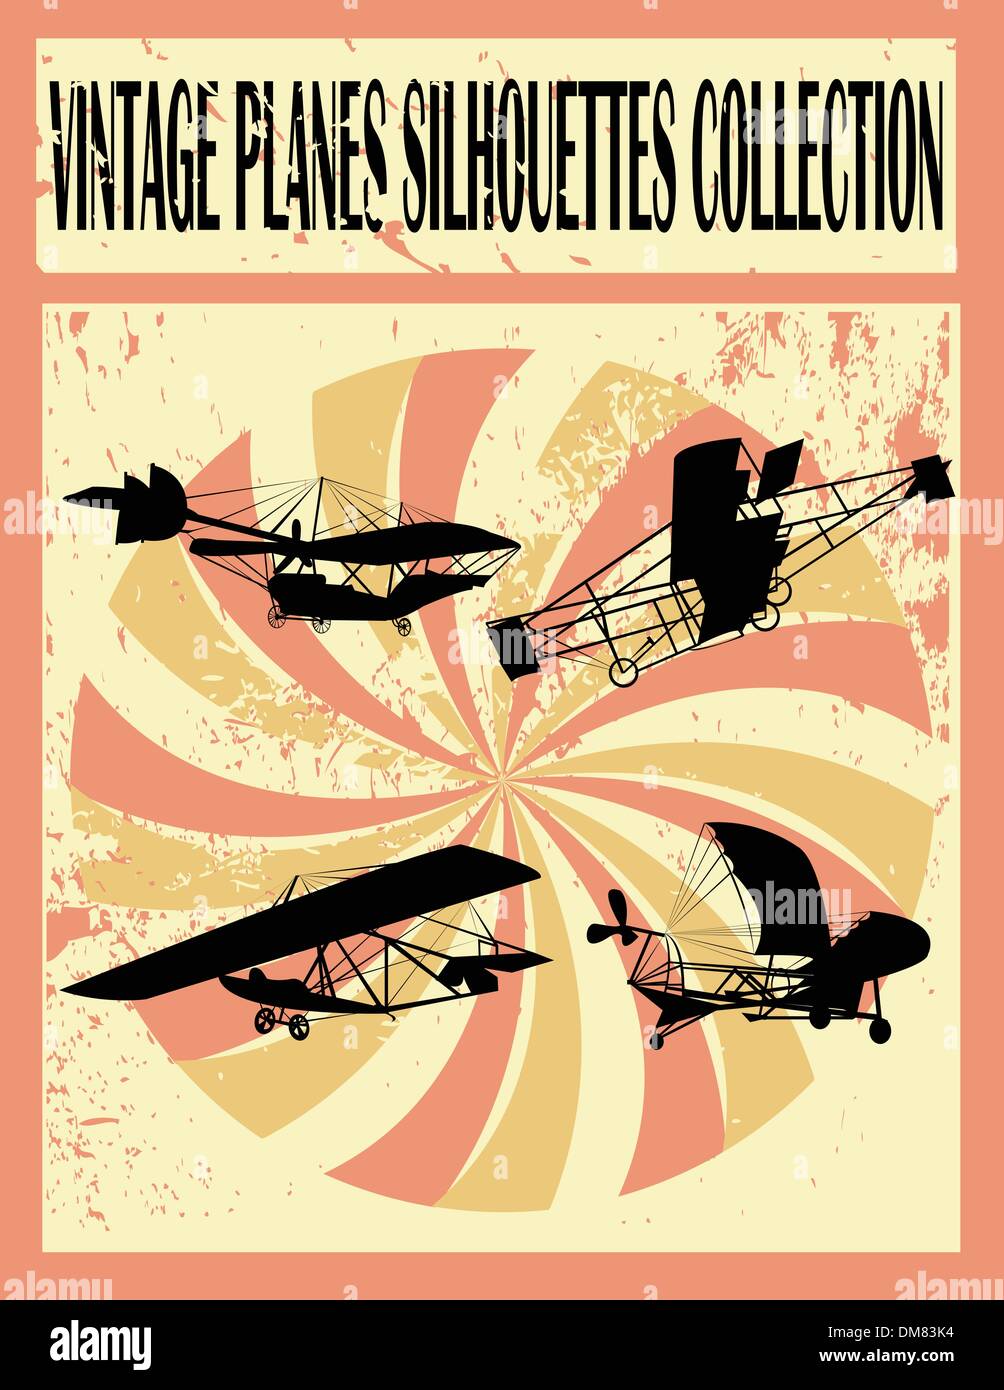 Vintage planes silhouettes collection Stock Vector